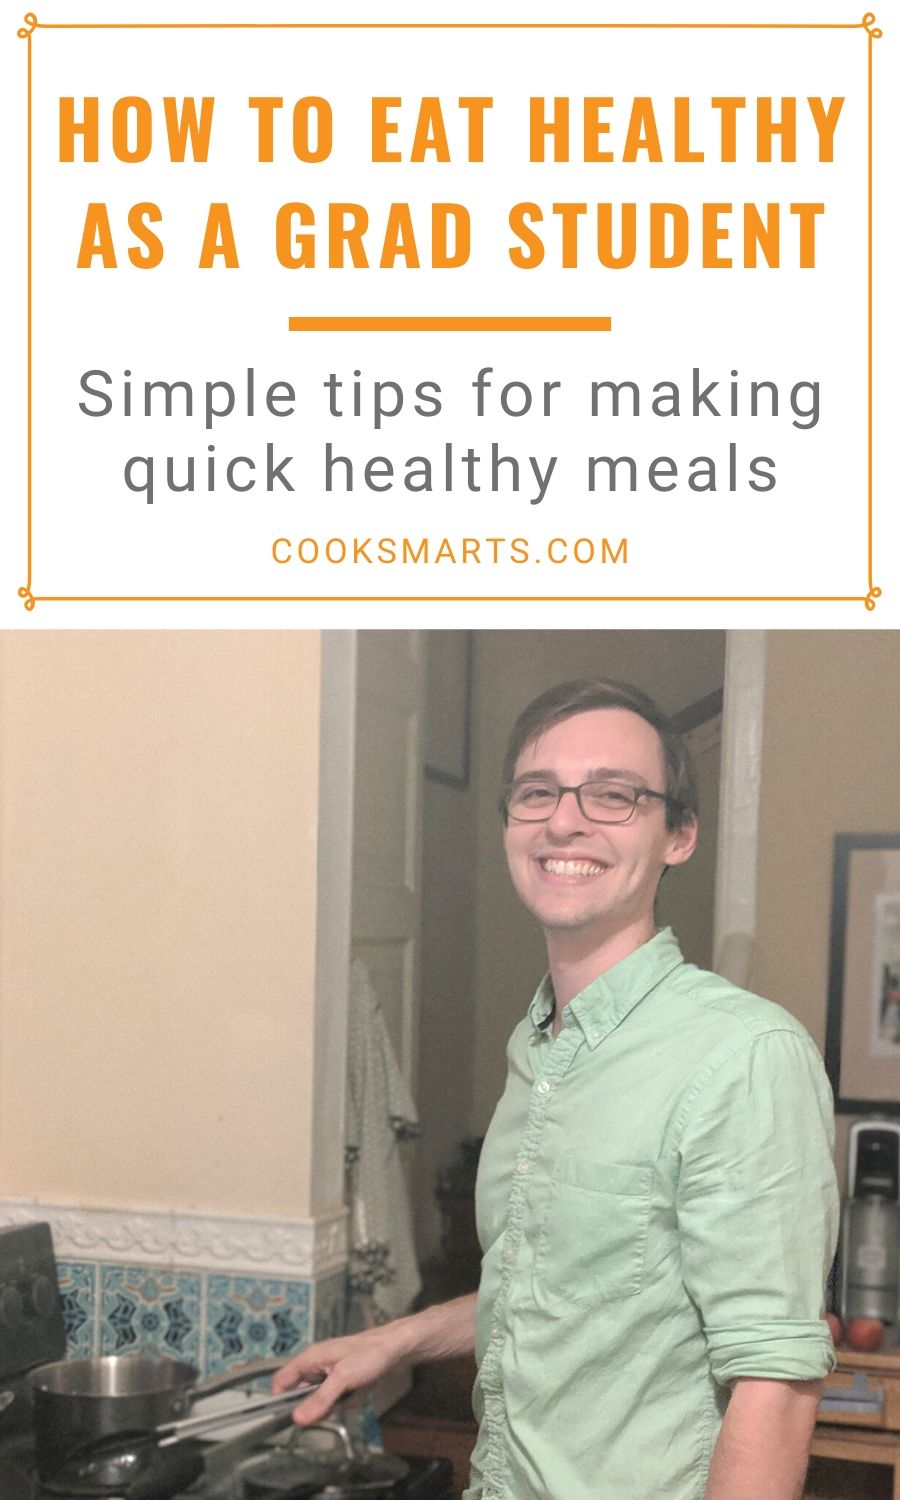 Jennifer and Anthony: Healthy Eating for Busy Professionals | Cook Smarts Kitchen Hero